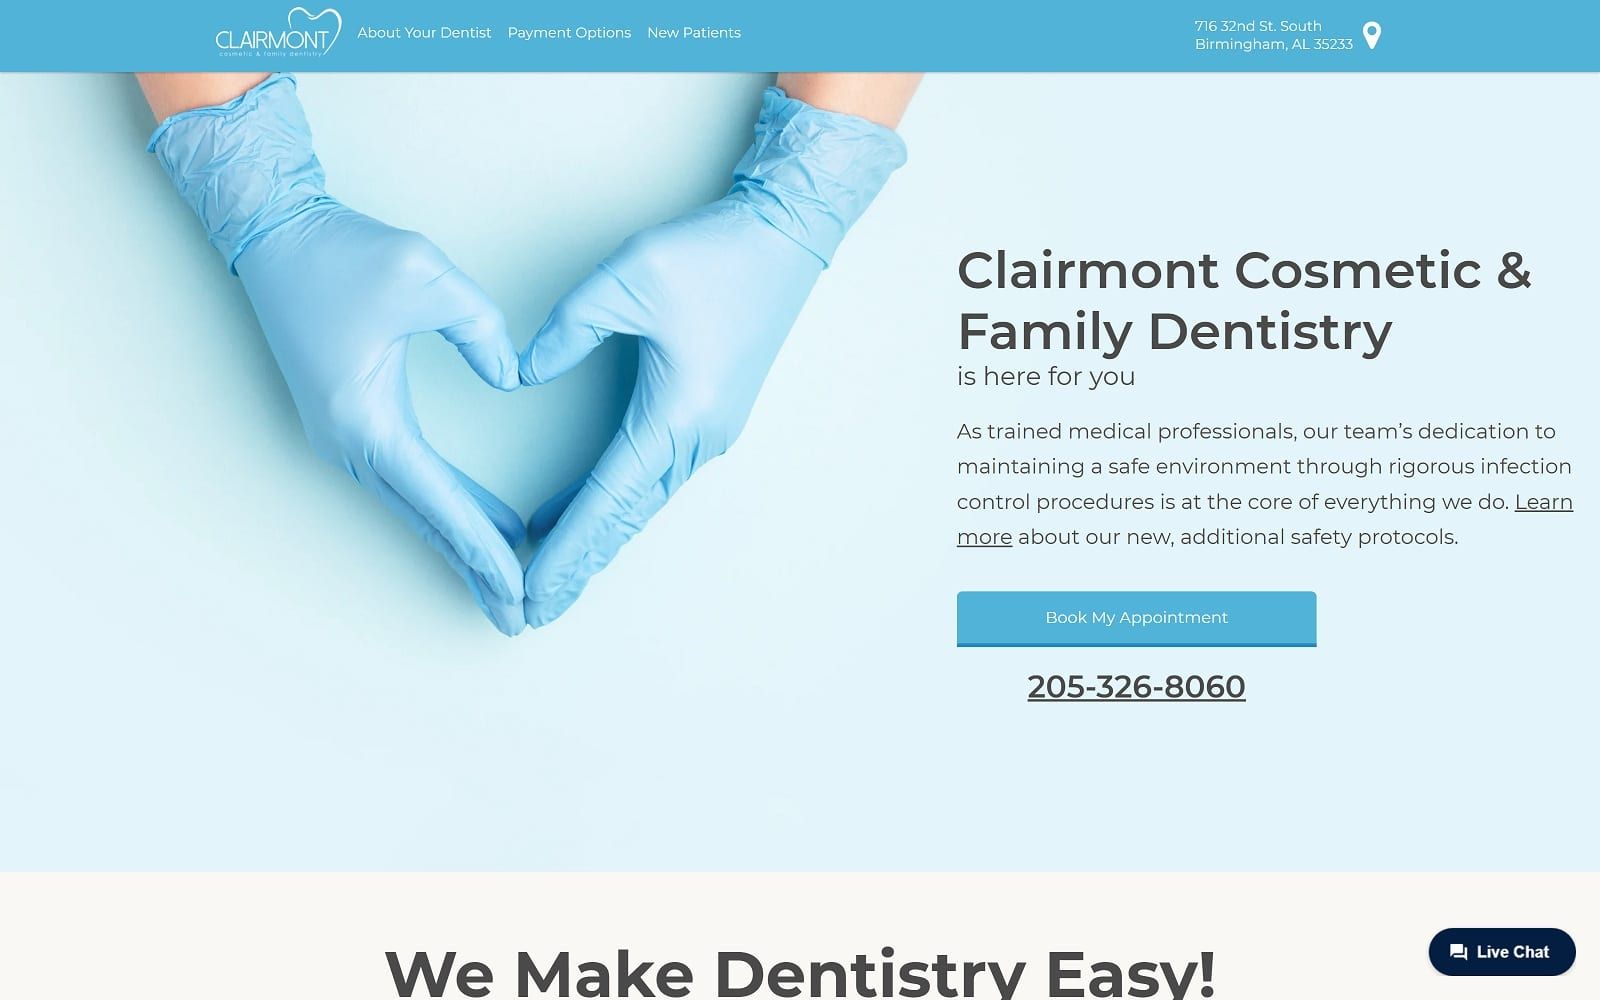 The screenshot of clairmont cosmetic & family dentistry clairmontsmiles. Com website